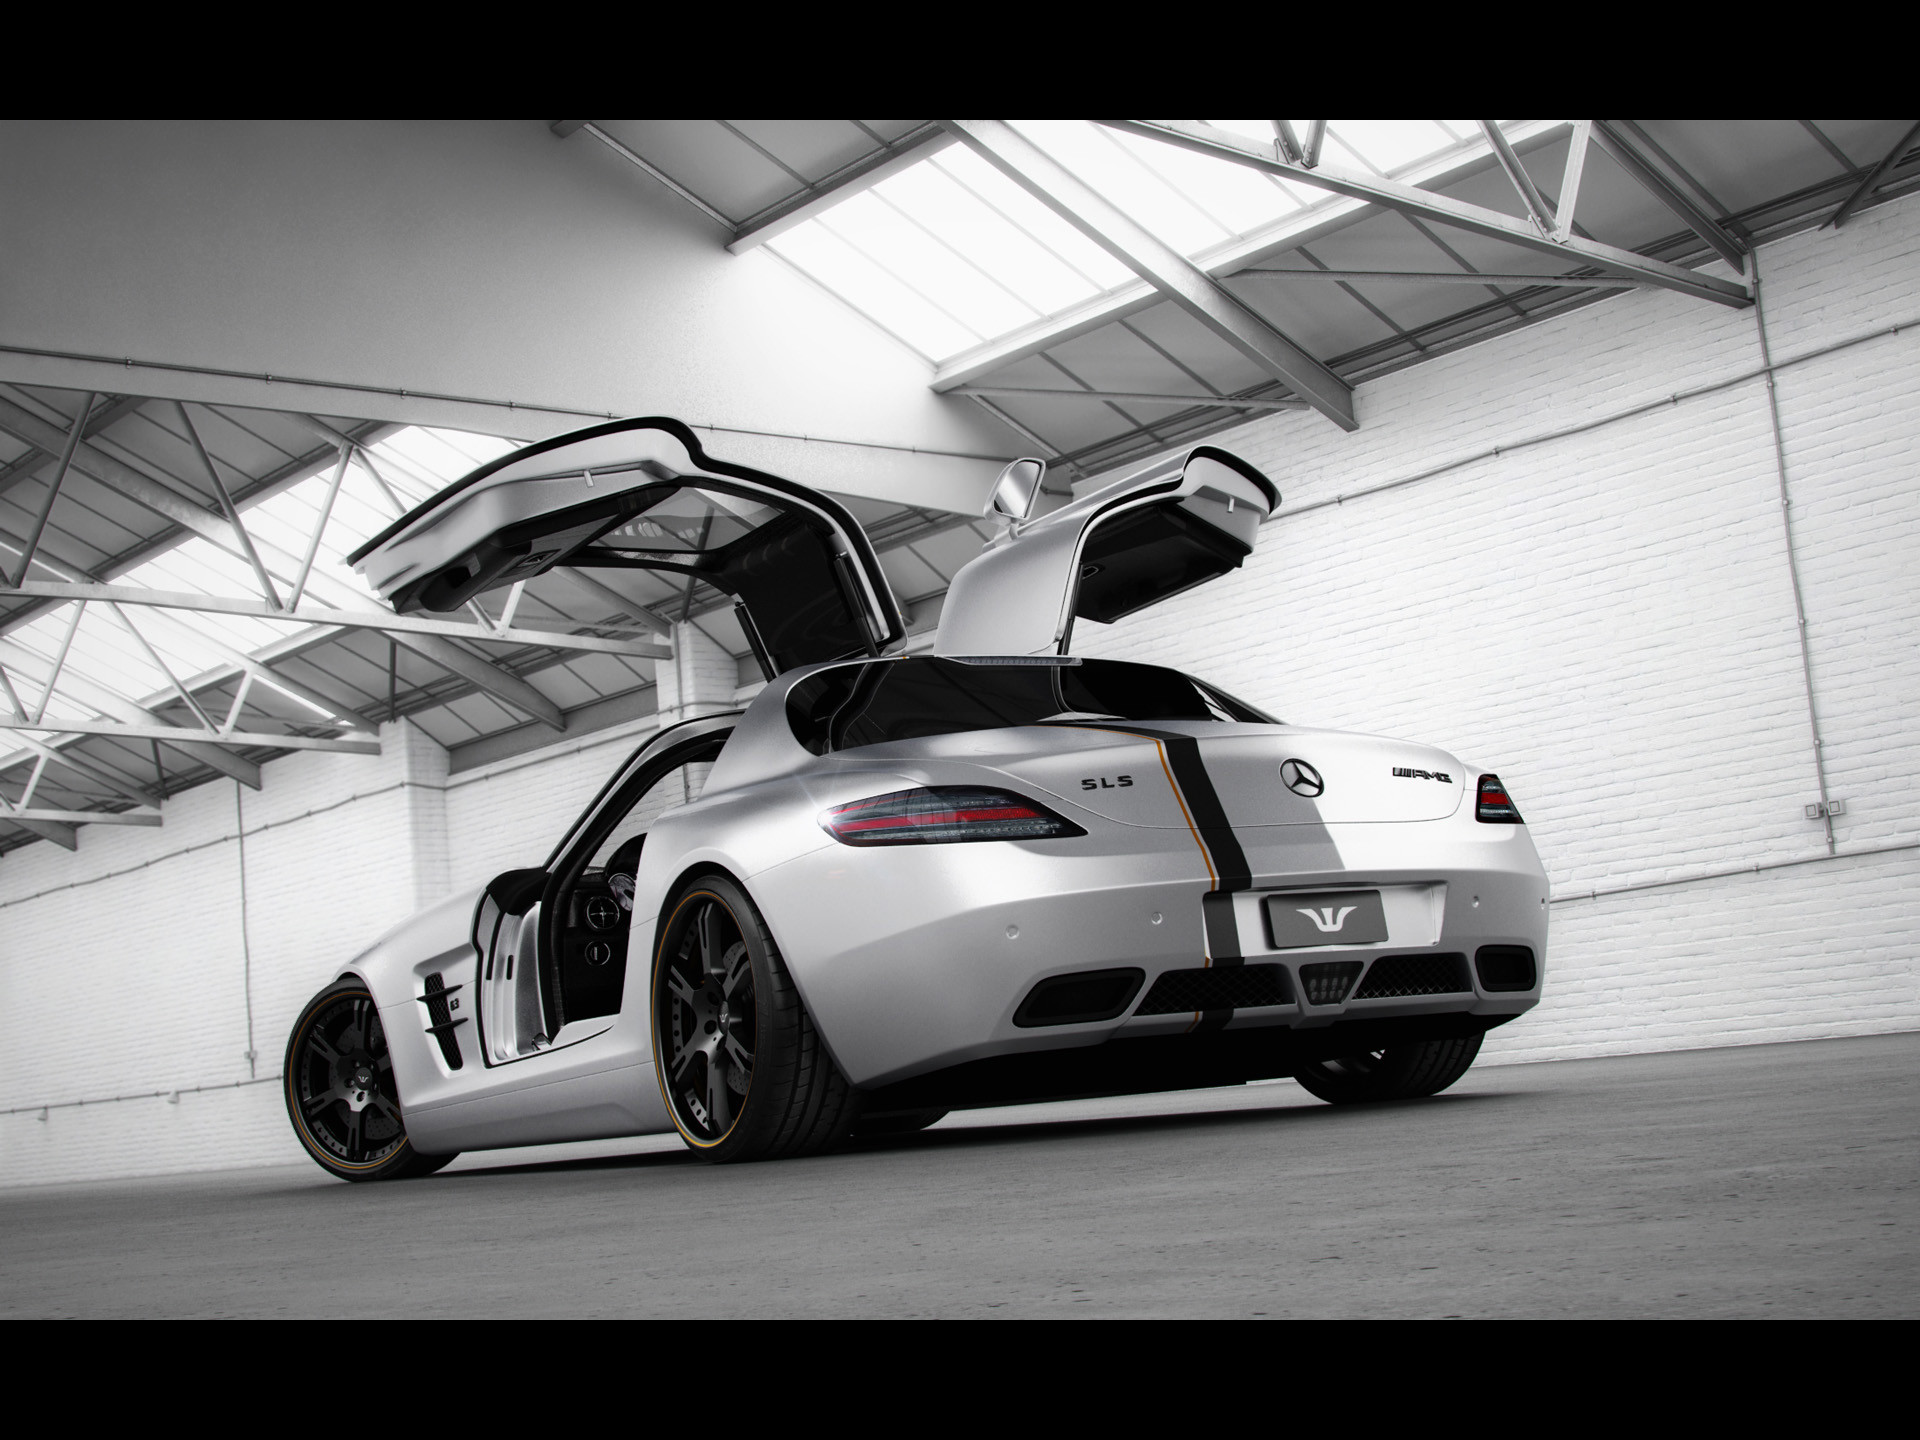 1920x1440 Bild: Mercedes Benz SLS AMG Silver Wing Rear wallpapers and stock photos. Â«